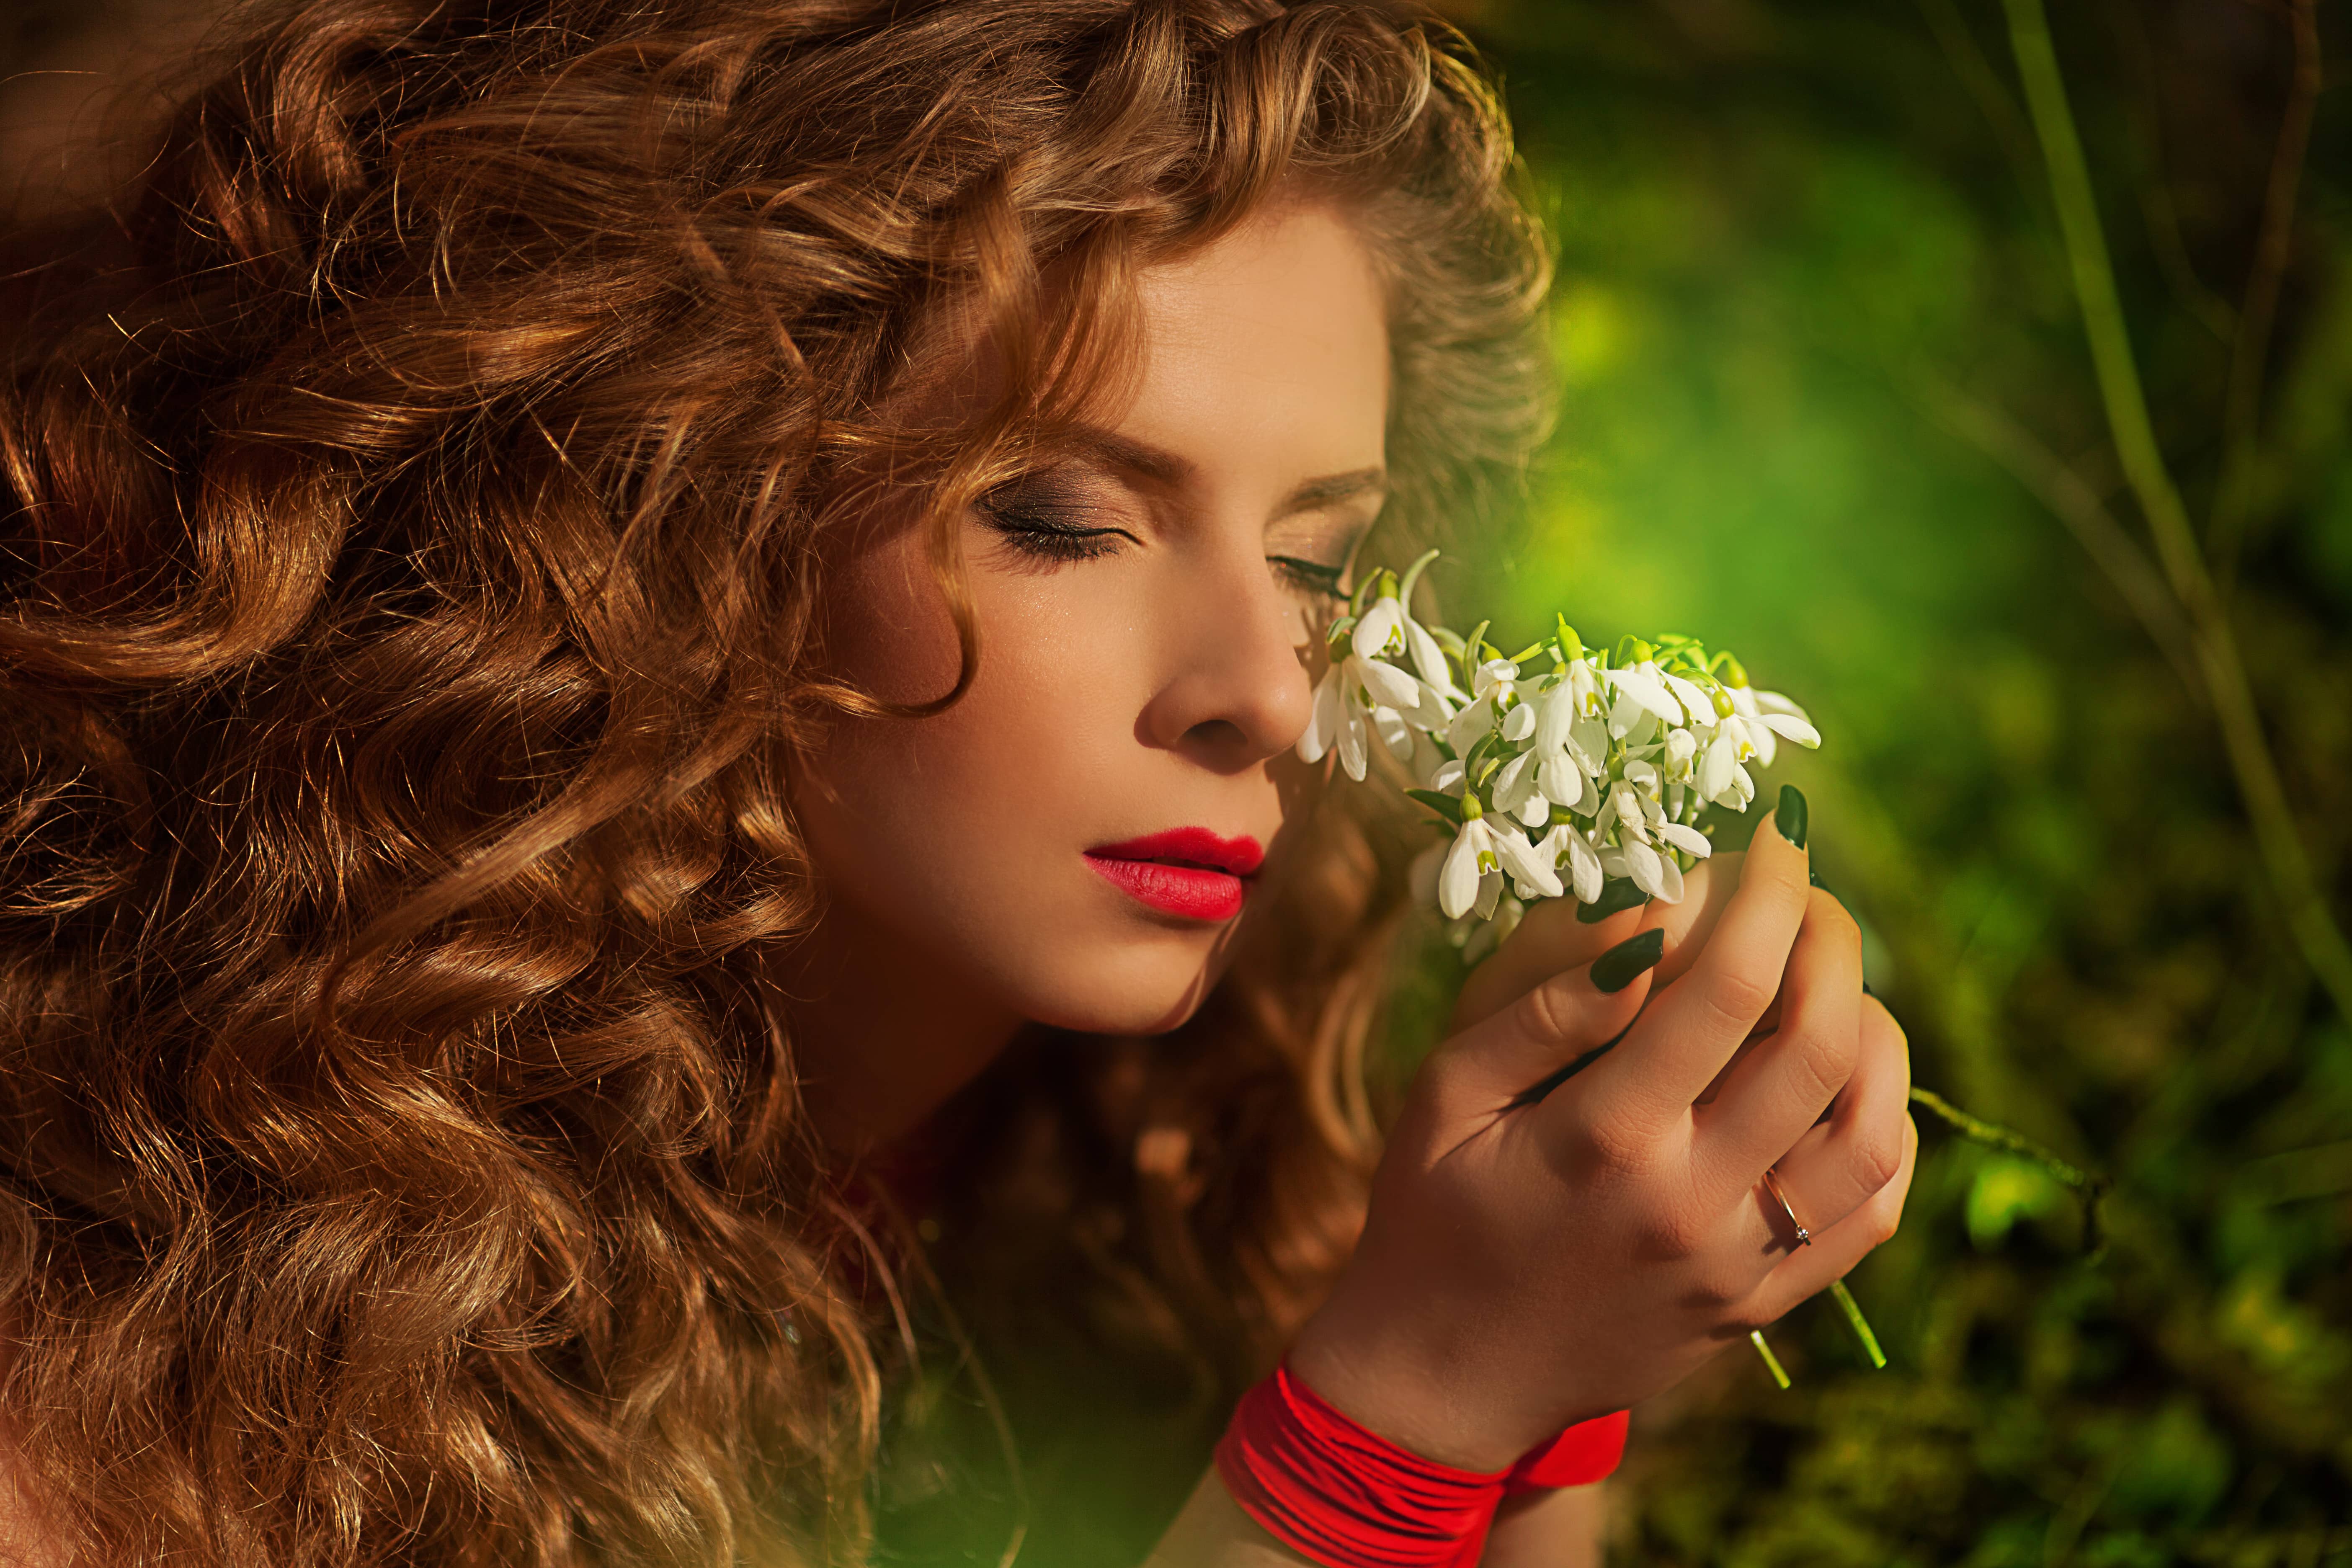 Beautiful woman in long red dress holding white flowers